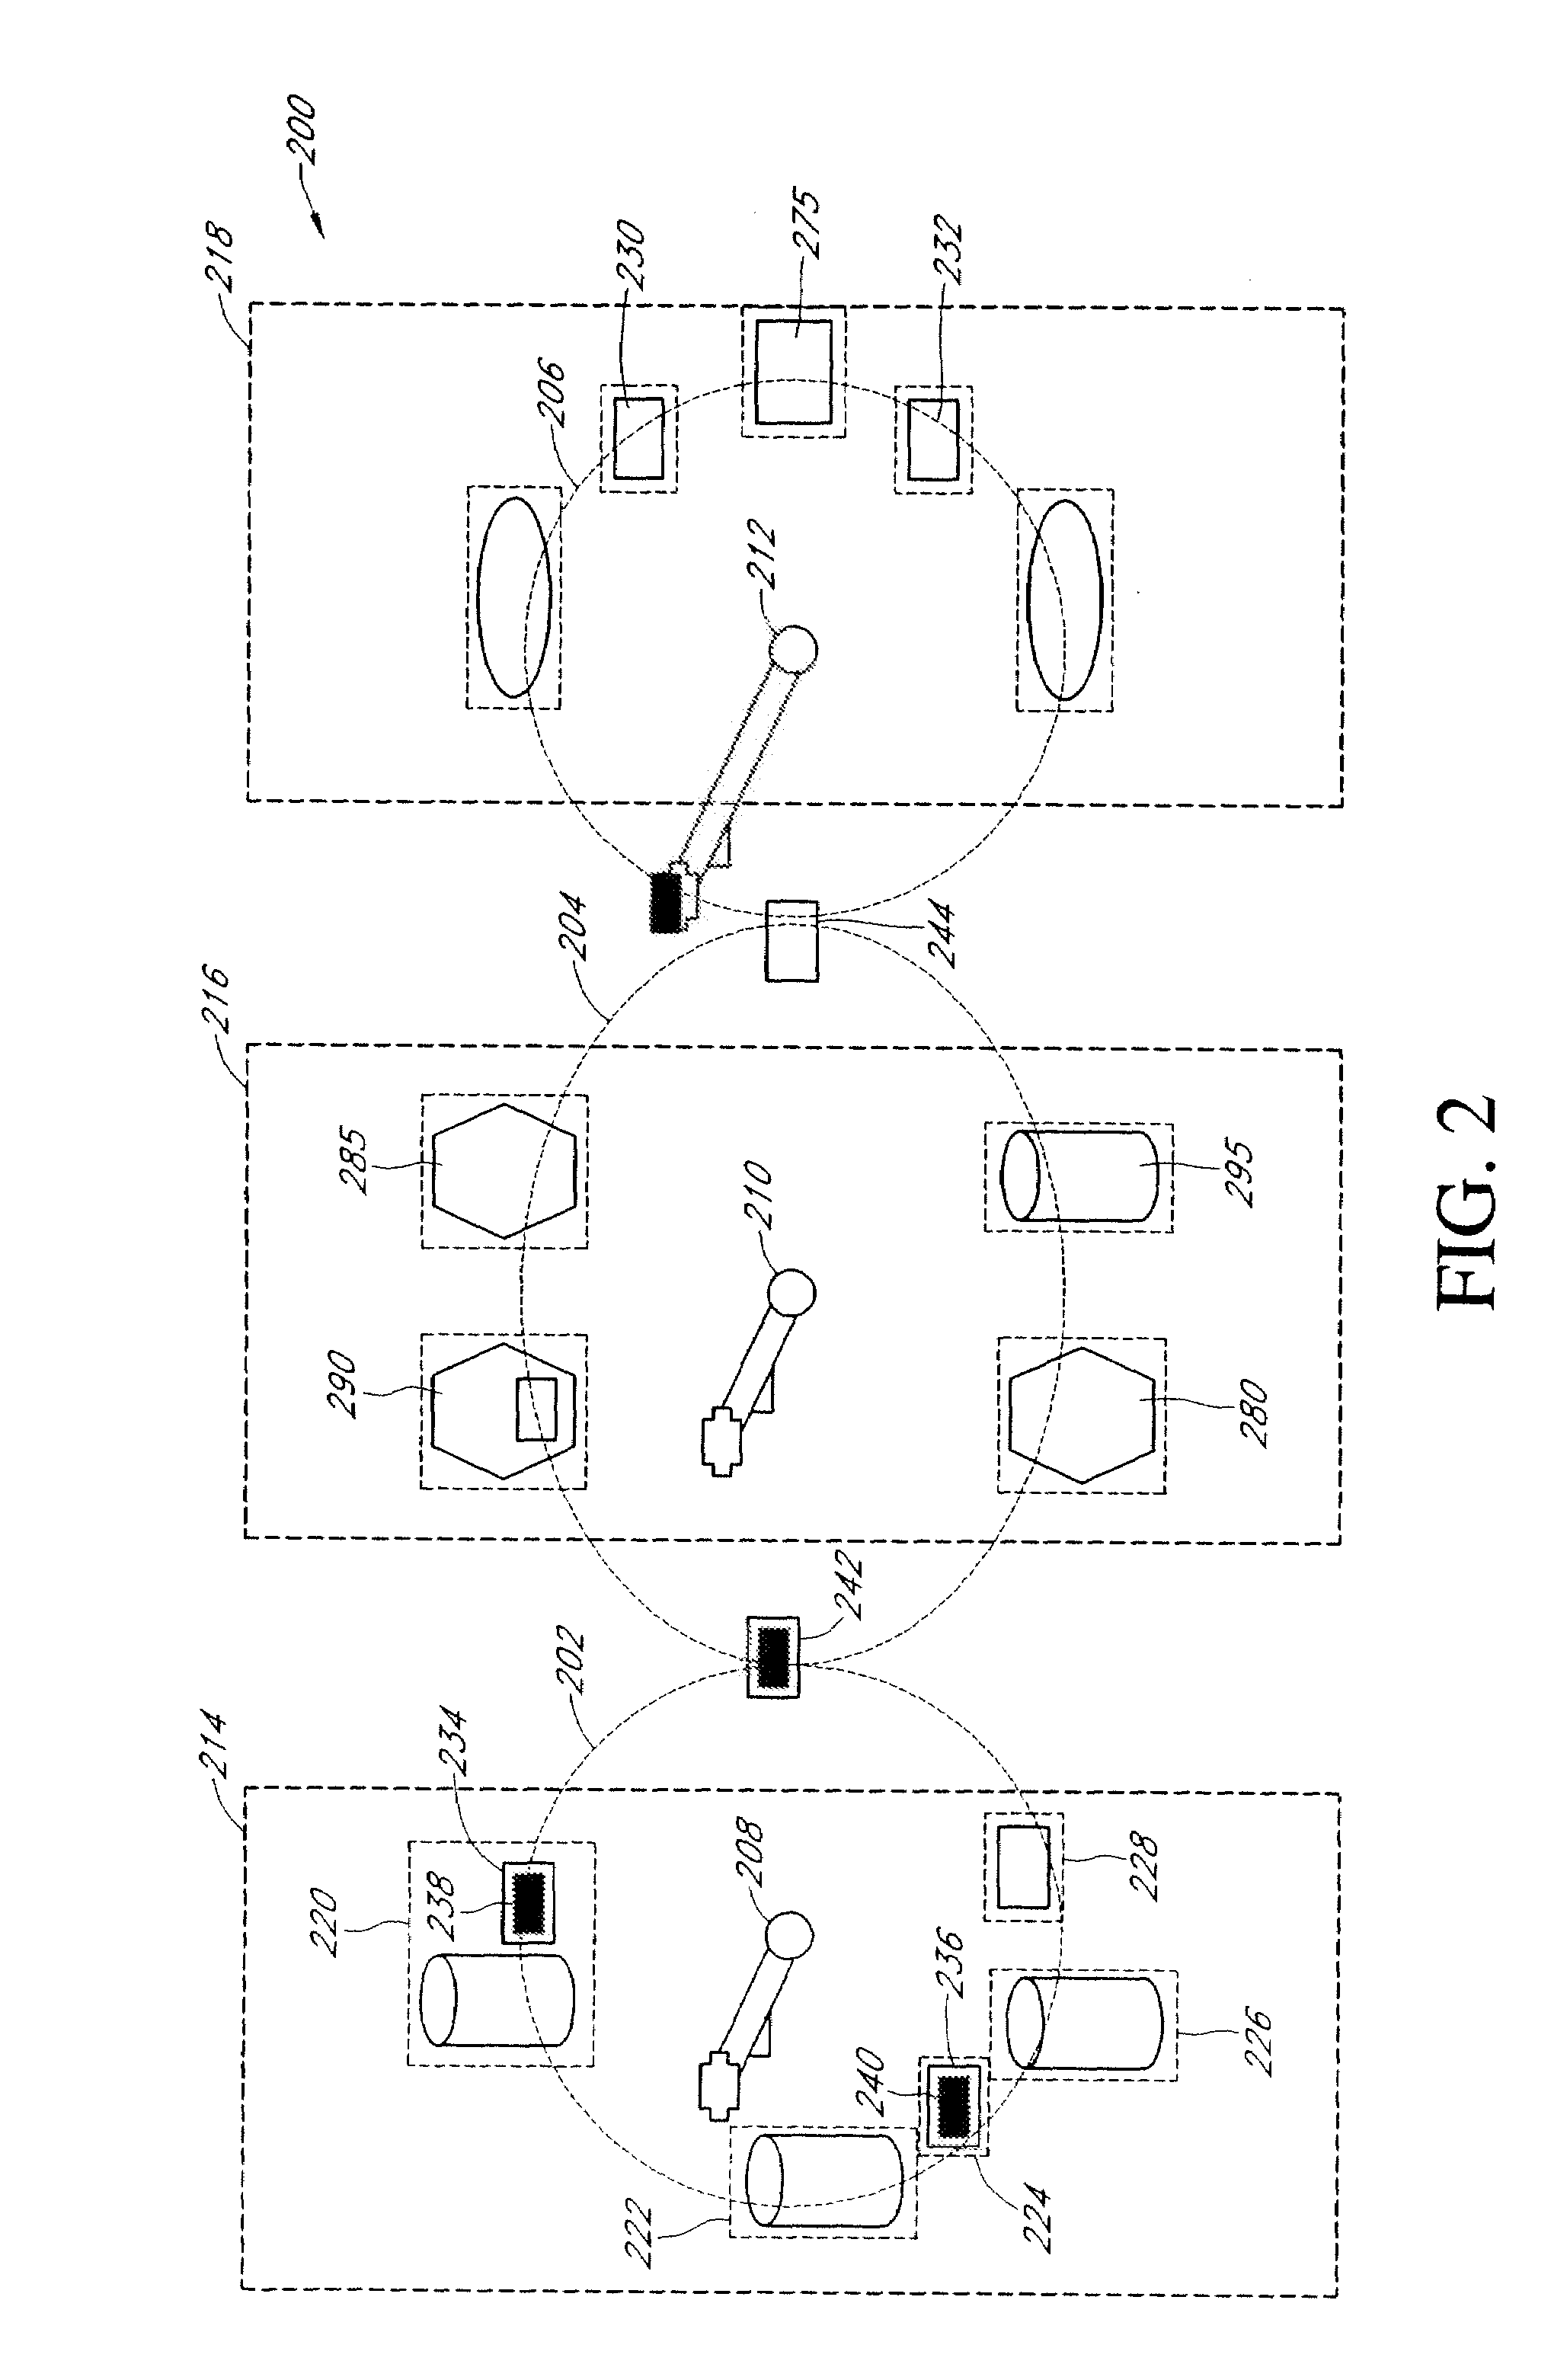 Compound profiling devices, systems, and related methods